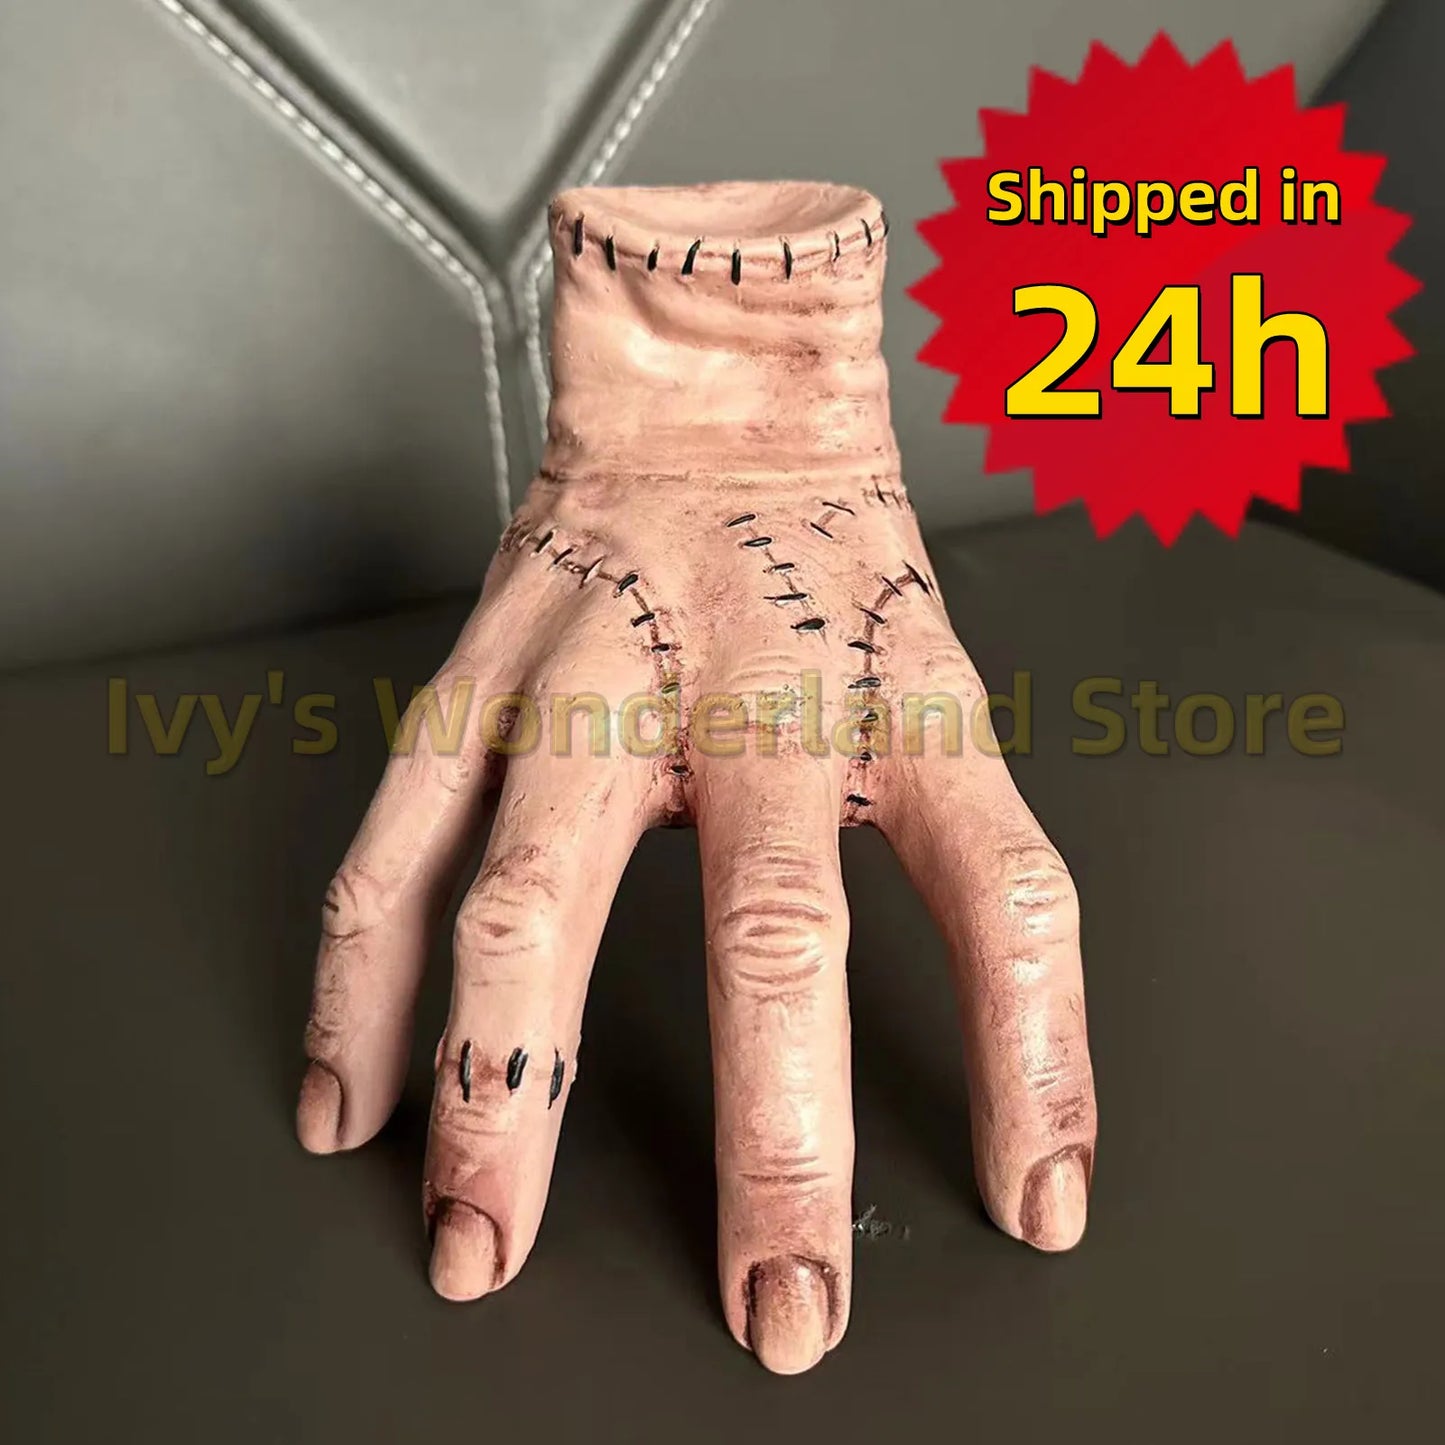 Wednesday Addams Hand Family Party Decor Costume Girls Wig Latex Hand Ornament Figurine Wednesday Thing Halloween Toy Sculpture